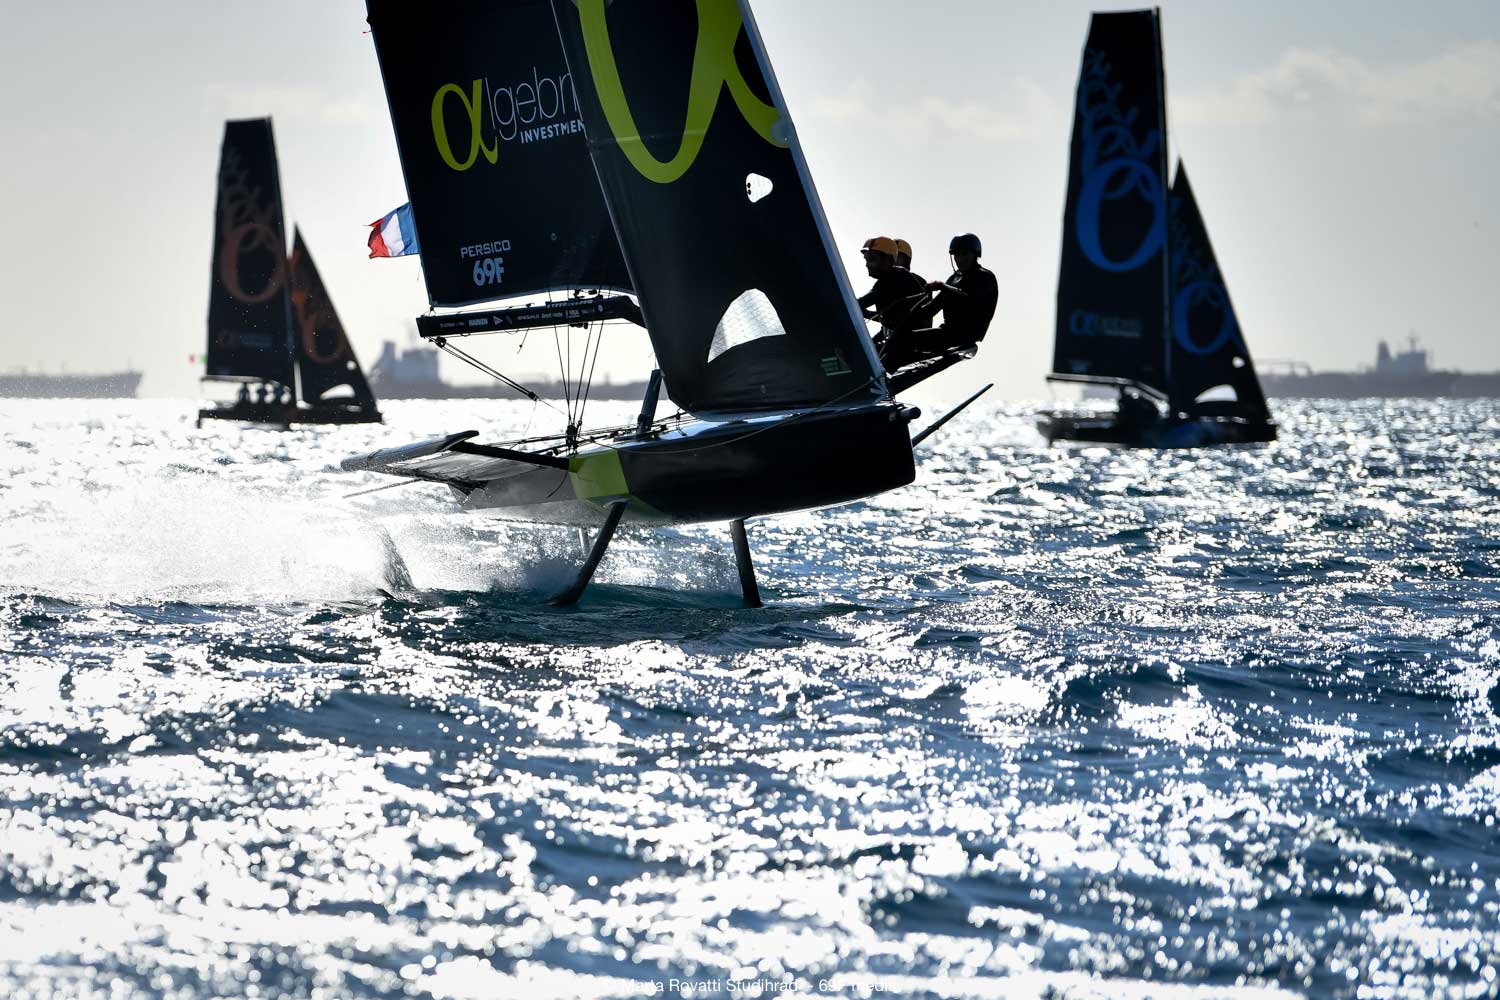  Persico 69F  Youth Foiling Gold Cup  Finals  Barcelona ESP  Day 2